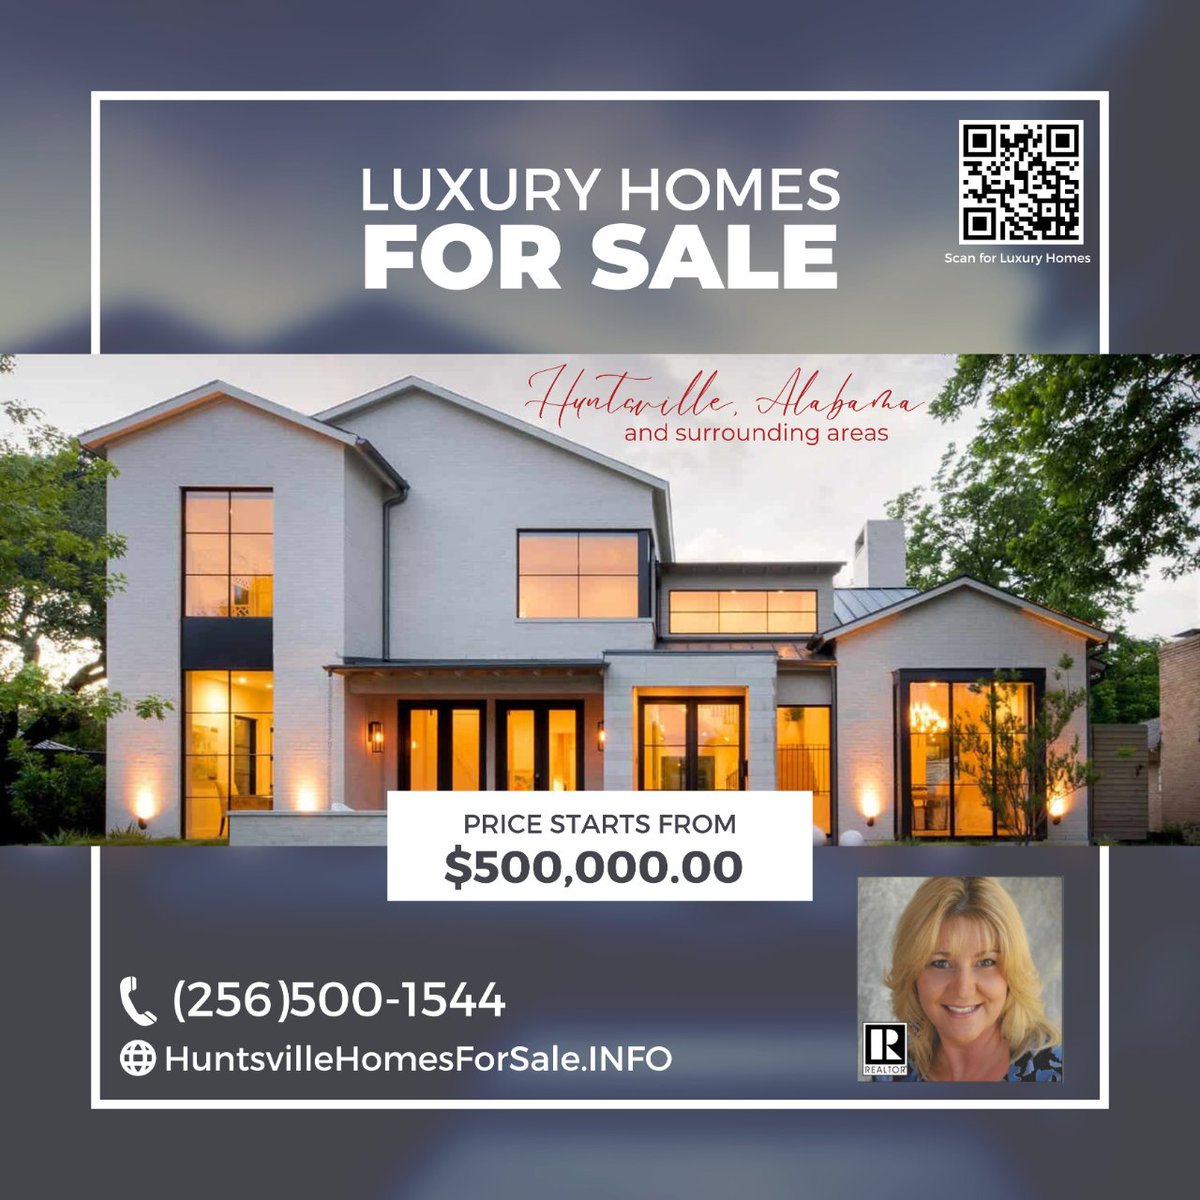 Are you in the market for a Luxury Home? Check out these stunning Luxury Homes for sale in Huntsville Al. 🏡 ❤️ i.mtr.cool/vosnrmsabt #huntsville #huntsvillealabama #huntsvilleluxuryhomes #huntsvillehomesforsale #rebekahroserealtor #remaxunlimited #dreamhome #huntsvilleluxury